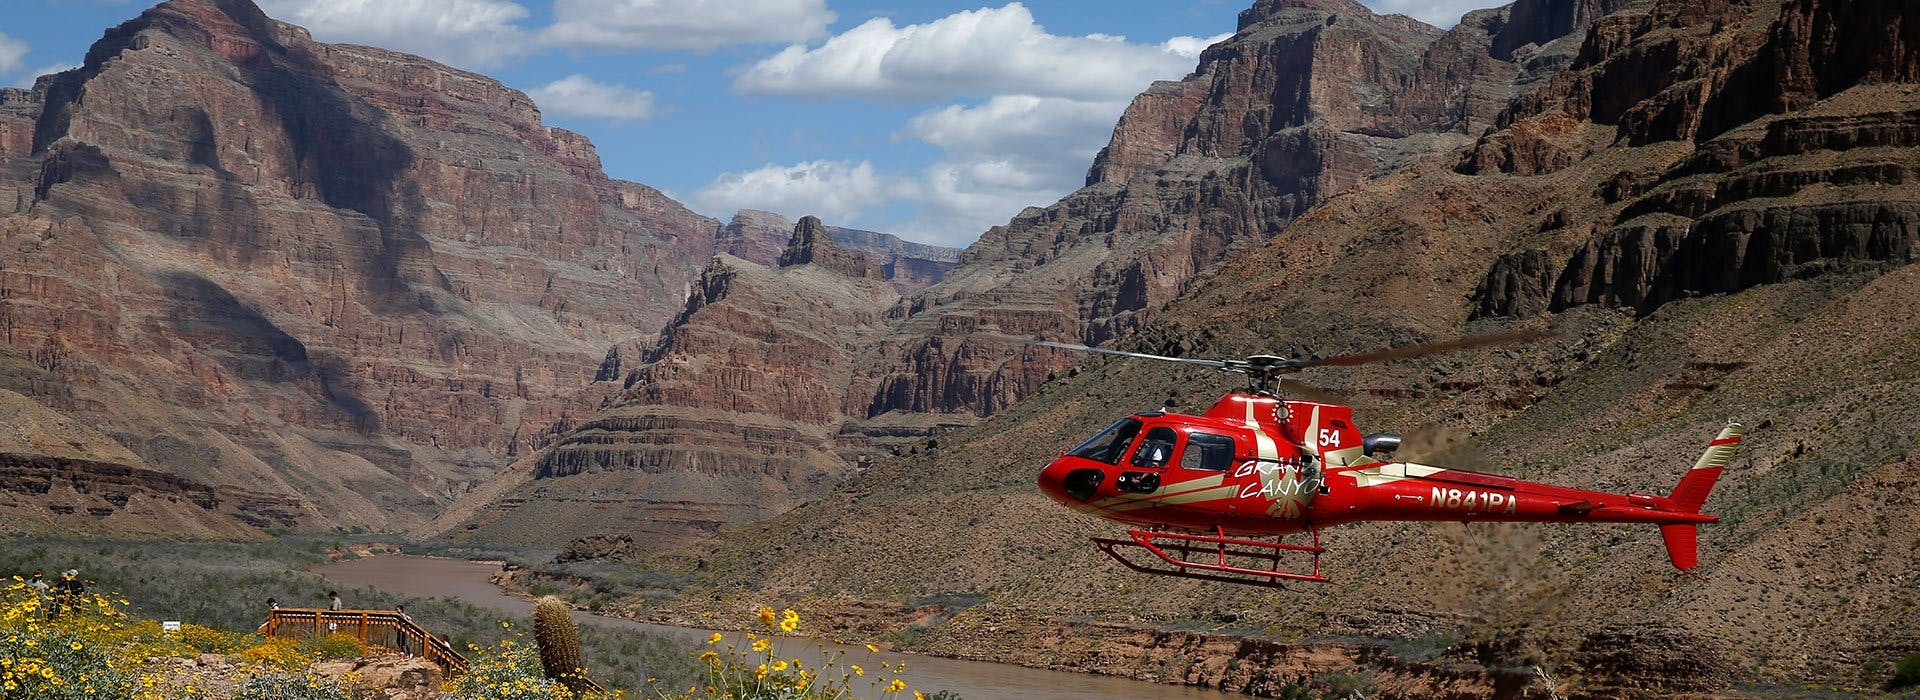 Grand Voyager Boots- und Helikoptertour ab Las Vegas